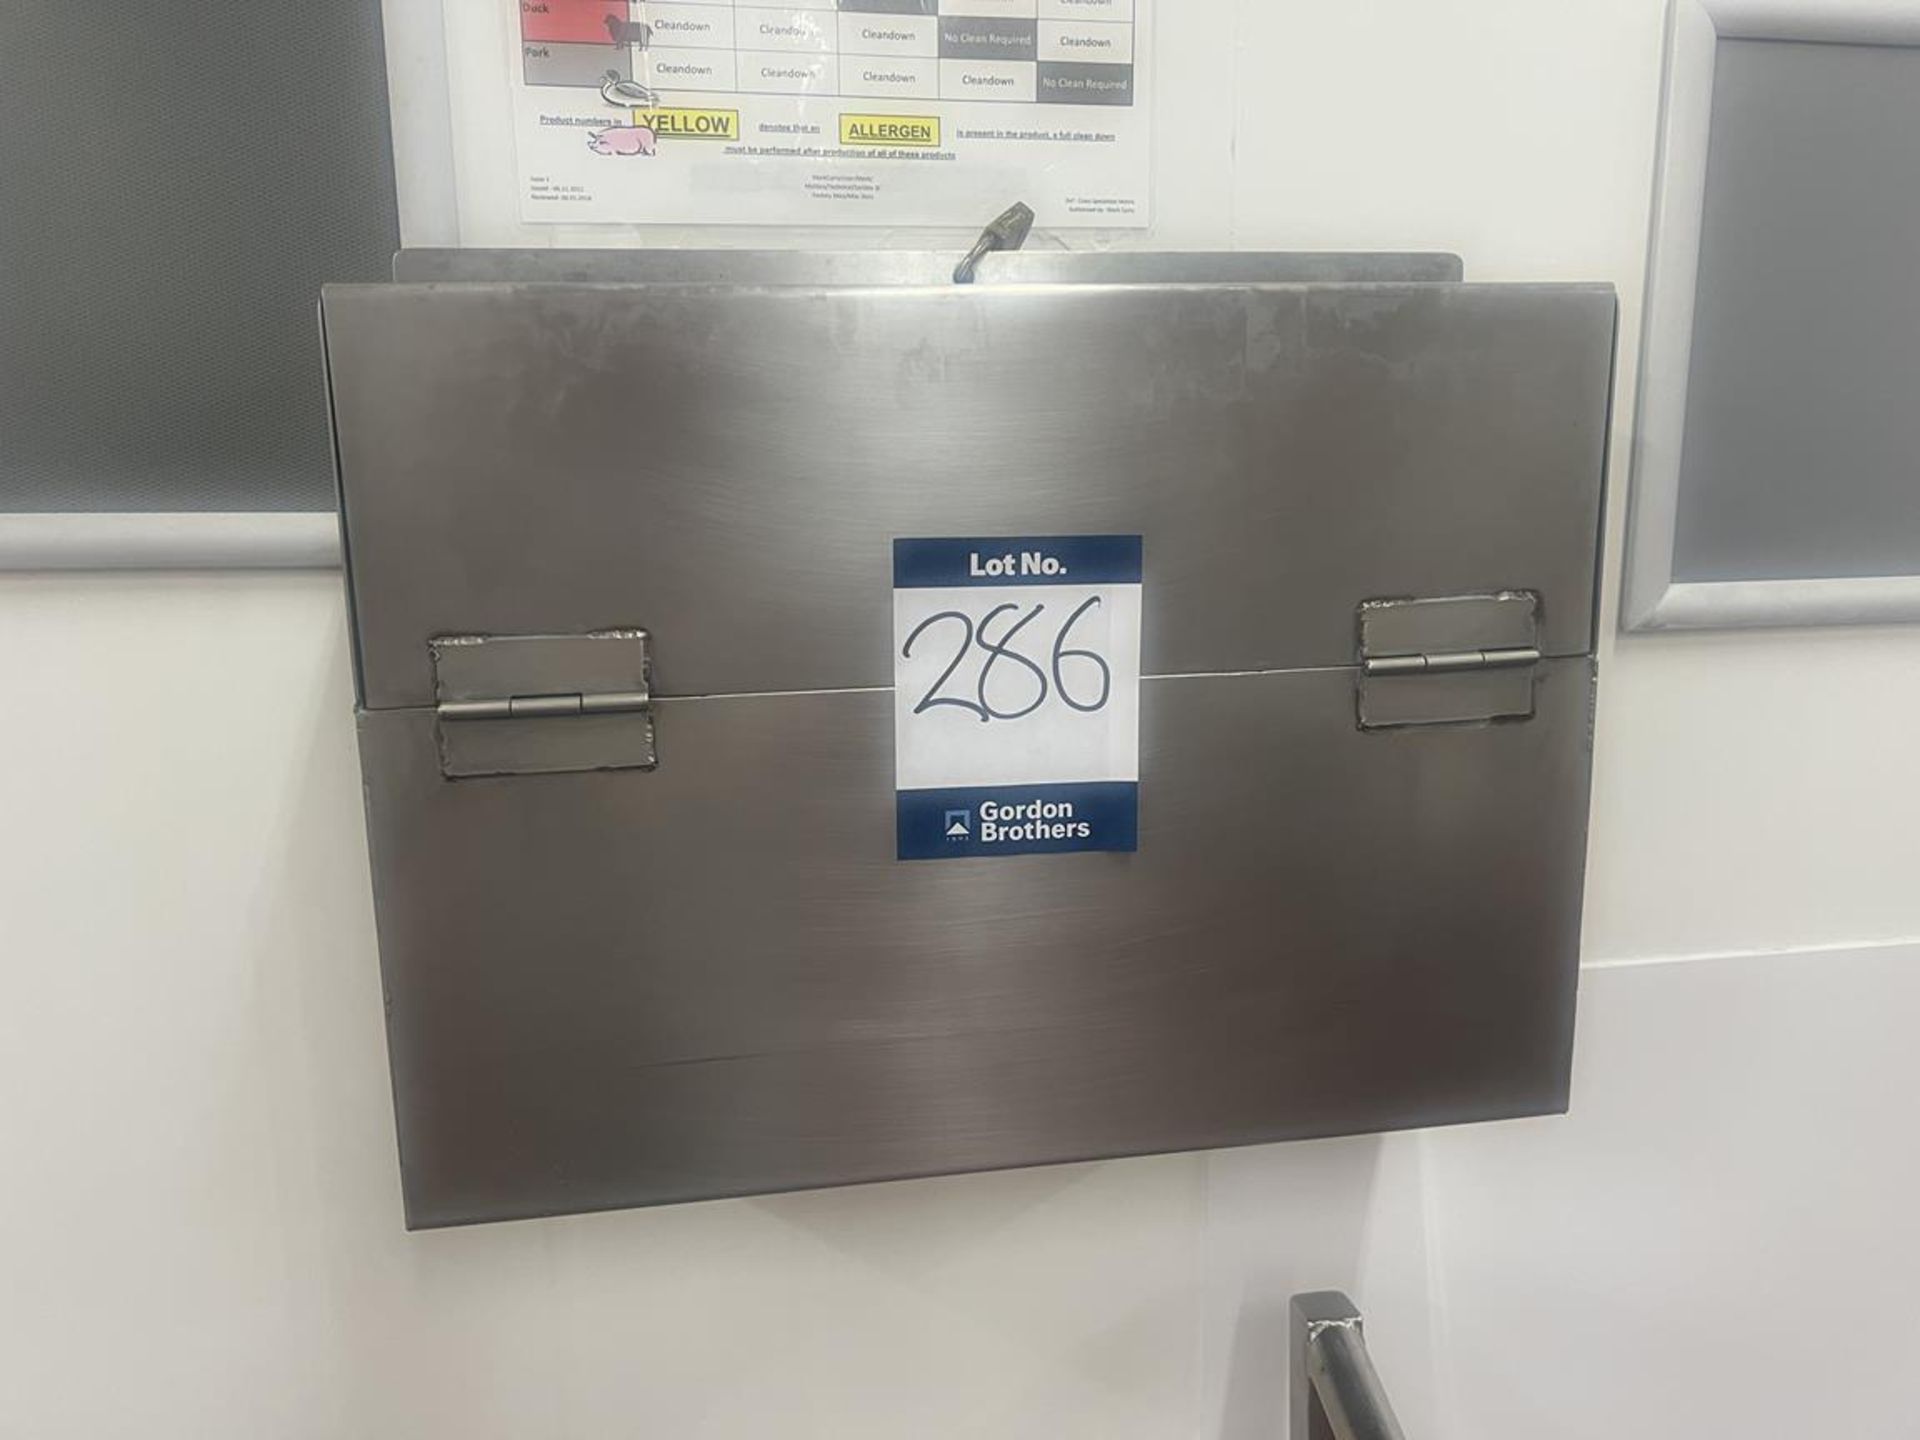 2x (no.) Teknomek stainless steel glove dispenser boxes, 2x lockable stainless steel knife box, - Image 2 of 6